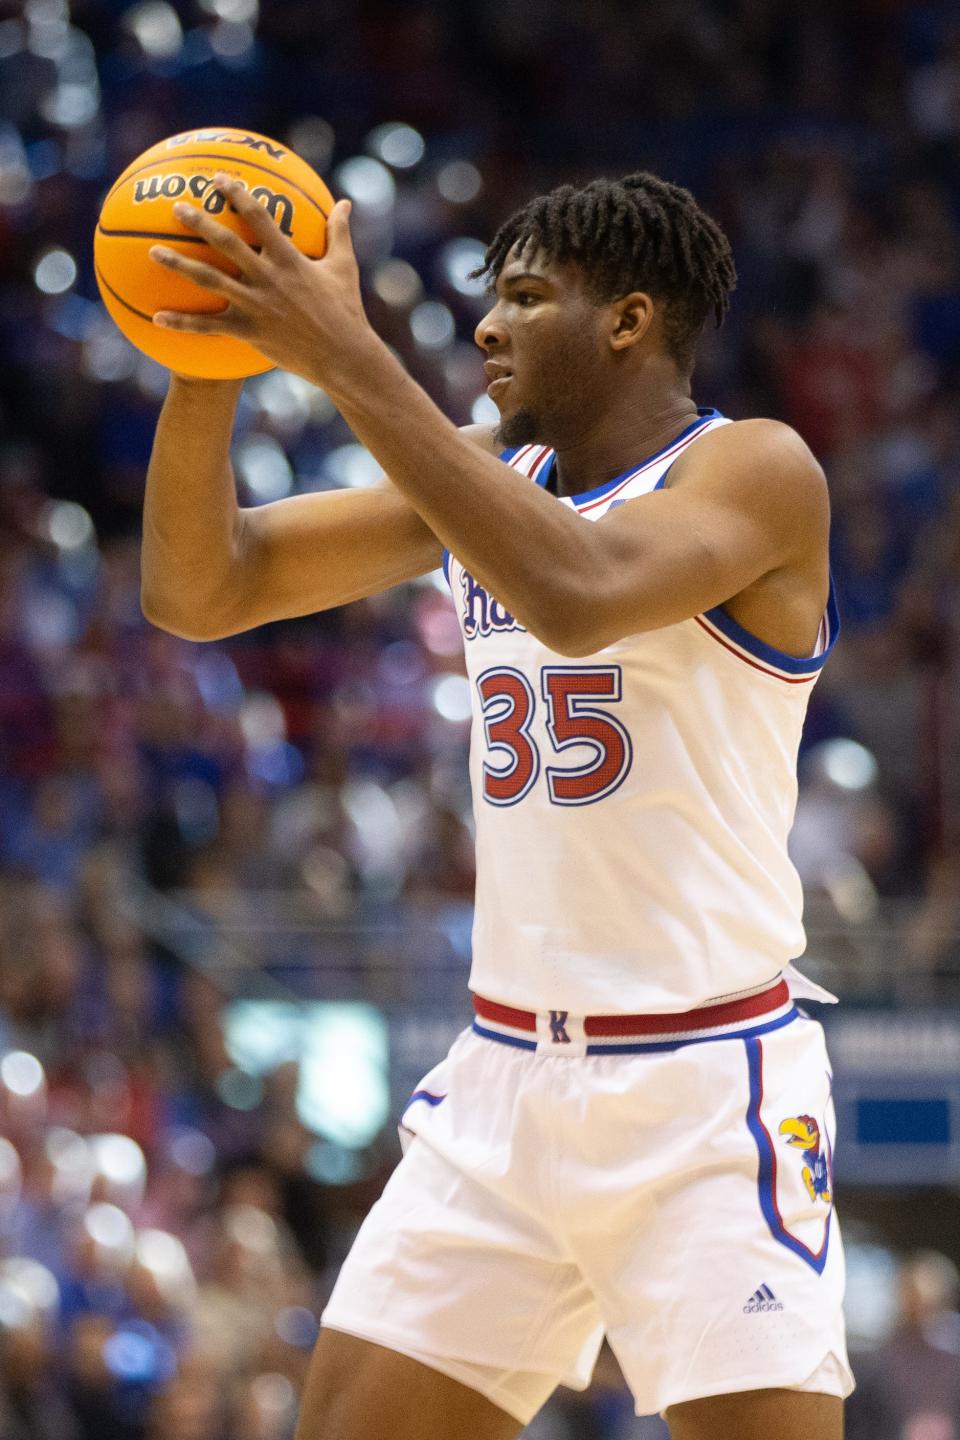 Then with Kansas, Zuby Ejiofor (35) looks to make a play during the second half of a game this past season against Indiana inside Allen Fieldhouse.